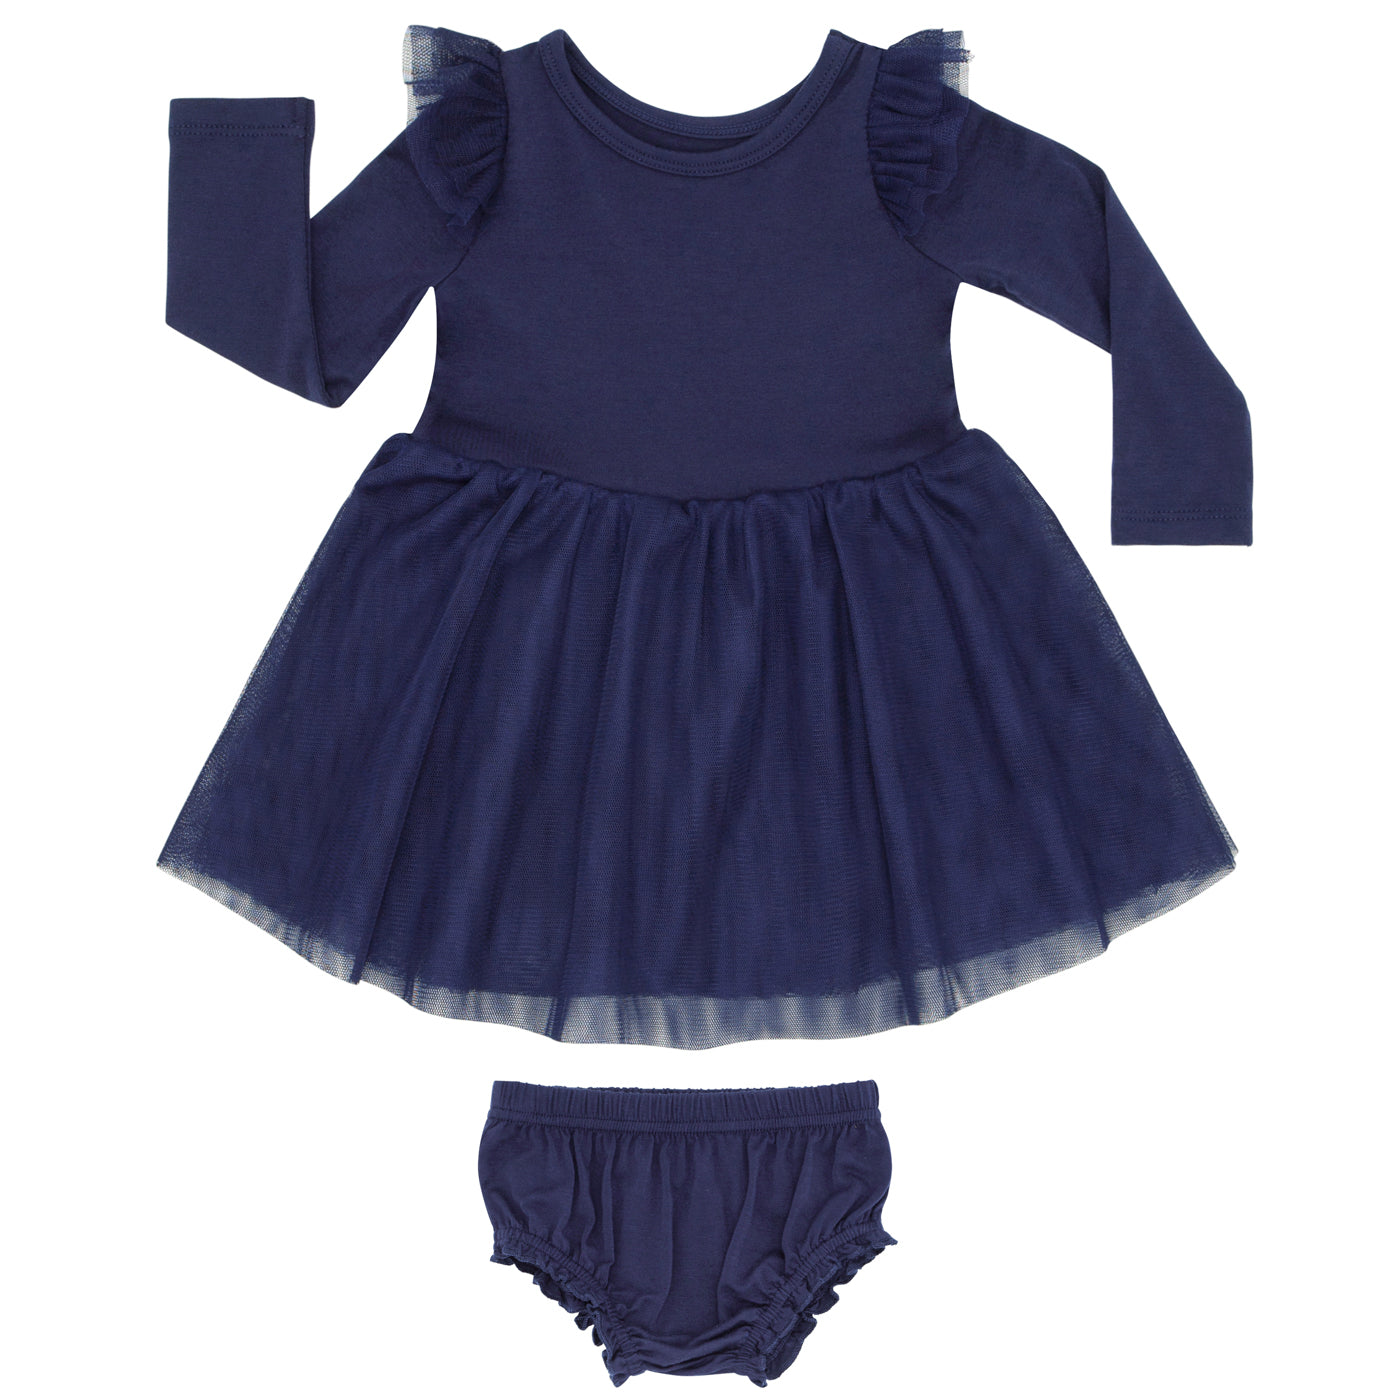 Flat lay image of a Classic Navy flutter tutu dress with bloomer